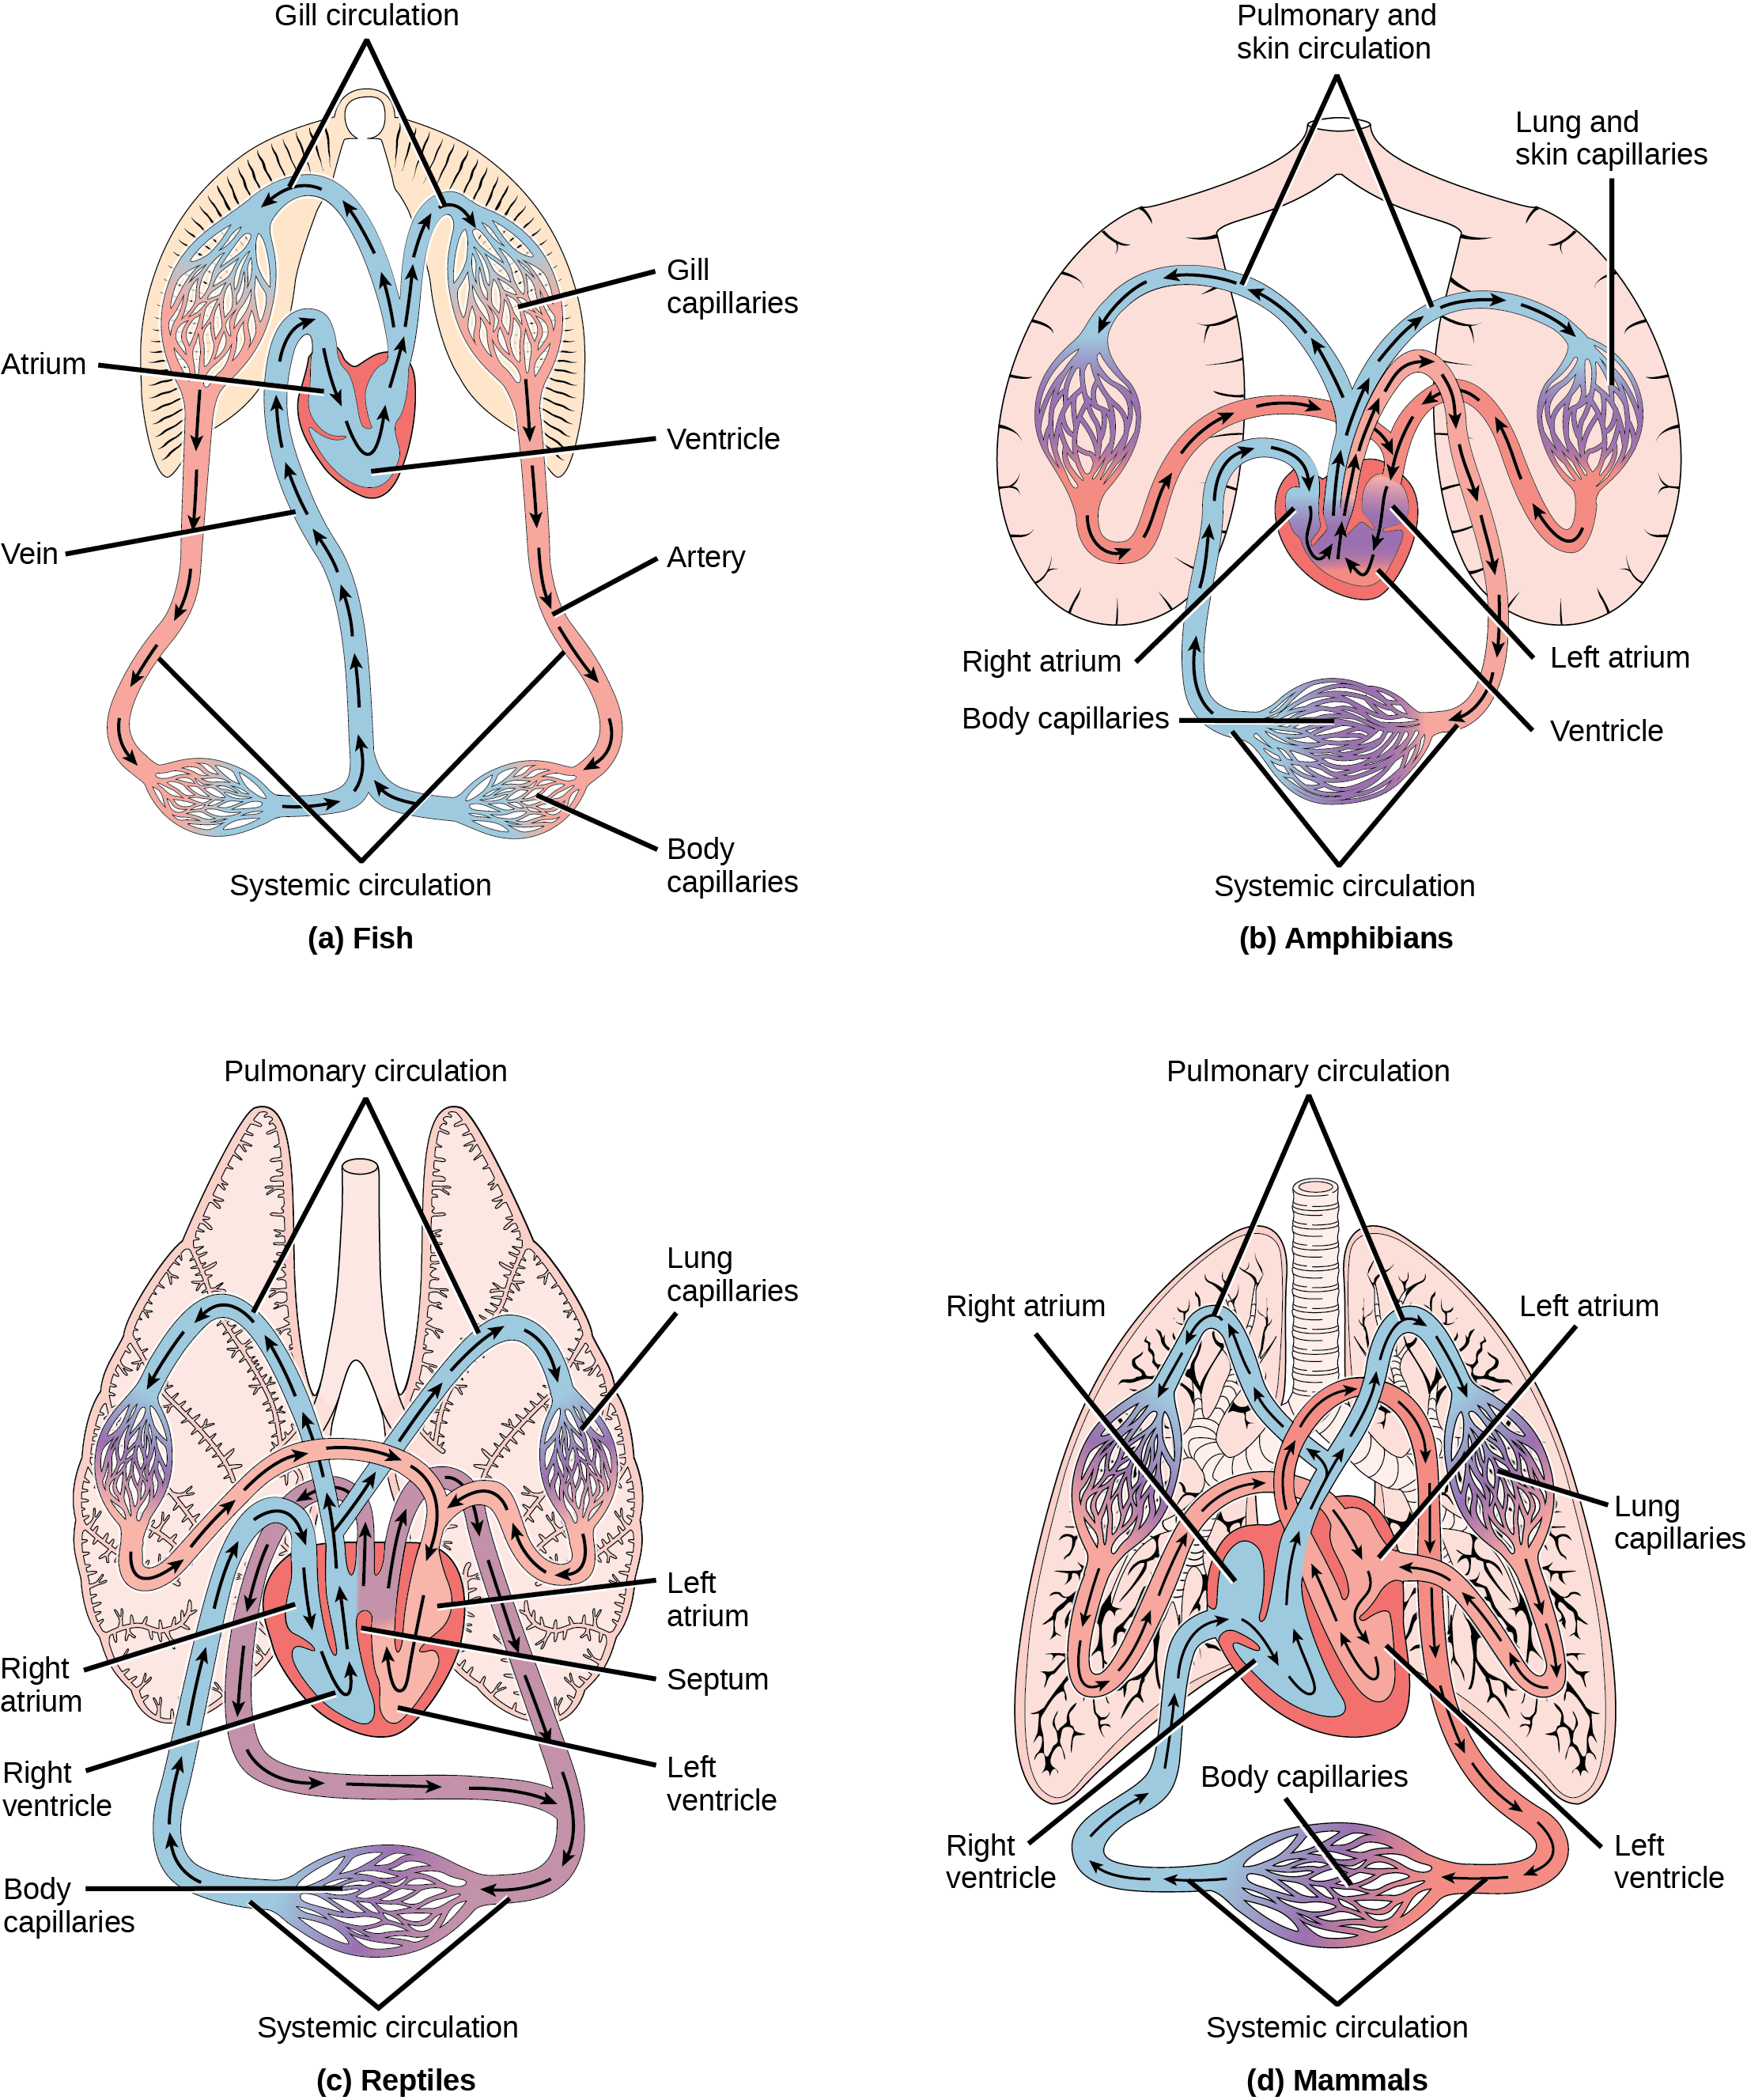 Illustration A shows the circulatory system of fish, which have a two-chambered heart with one atrium and one ventricle. Blood in systemic circulation flows from the body into the atrium, then into the ventricle. Blood exiting the heart enters gill circulation, where gases are exchanged by gill capillaries. From the gills blood re-enters systemic circulation, where gases in the body are exchanged by body capillaries. Illustration B shows the circulatory system of amphibians, which have a three-chambered heart with two atriums and one ventricle. Blood in systemic circulation enters the heart, flows into the right atrium, then into the ventricle. Blood leaving the ventricle enters pulmonary and skin circulation. Capillaries in the lung and skin exchange gases, oxygenating the blood. From the lungs and skin blood re-enters the heart through the left atrium. Blood flows into the ventricle, where it mixes with blood from systemic circulation. Blood leaves the ventricle and enters systemic circulation. Illustration C shows the circulatory system of reptiles, which have a four-chambered heart. The right and left ventricle are separated by a septum, but there is no septum separating the right and left atrium, so there is some mixing of blood between these two chambers. Blood from systemic circulation enters the right atrium, then flows from the right ventricle and enters pulmonary circulation, where blood is oxygenated in the lungs. From the lungs blood travels back into the heart through the left atrium. Because the left and right atrium are not separated, some mixing of oxygenated and deoxygenated blood occurs. Blood is pumped into the left ventricle, then into the body. Illustration D shows the circulatory system of mammals, which have a four-chambered heart. Circulation is similar to that of reptiles, but the four chambers are completely separate from one another, which improves efficiency.